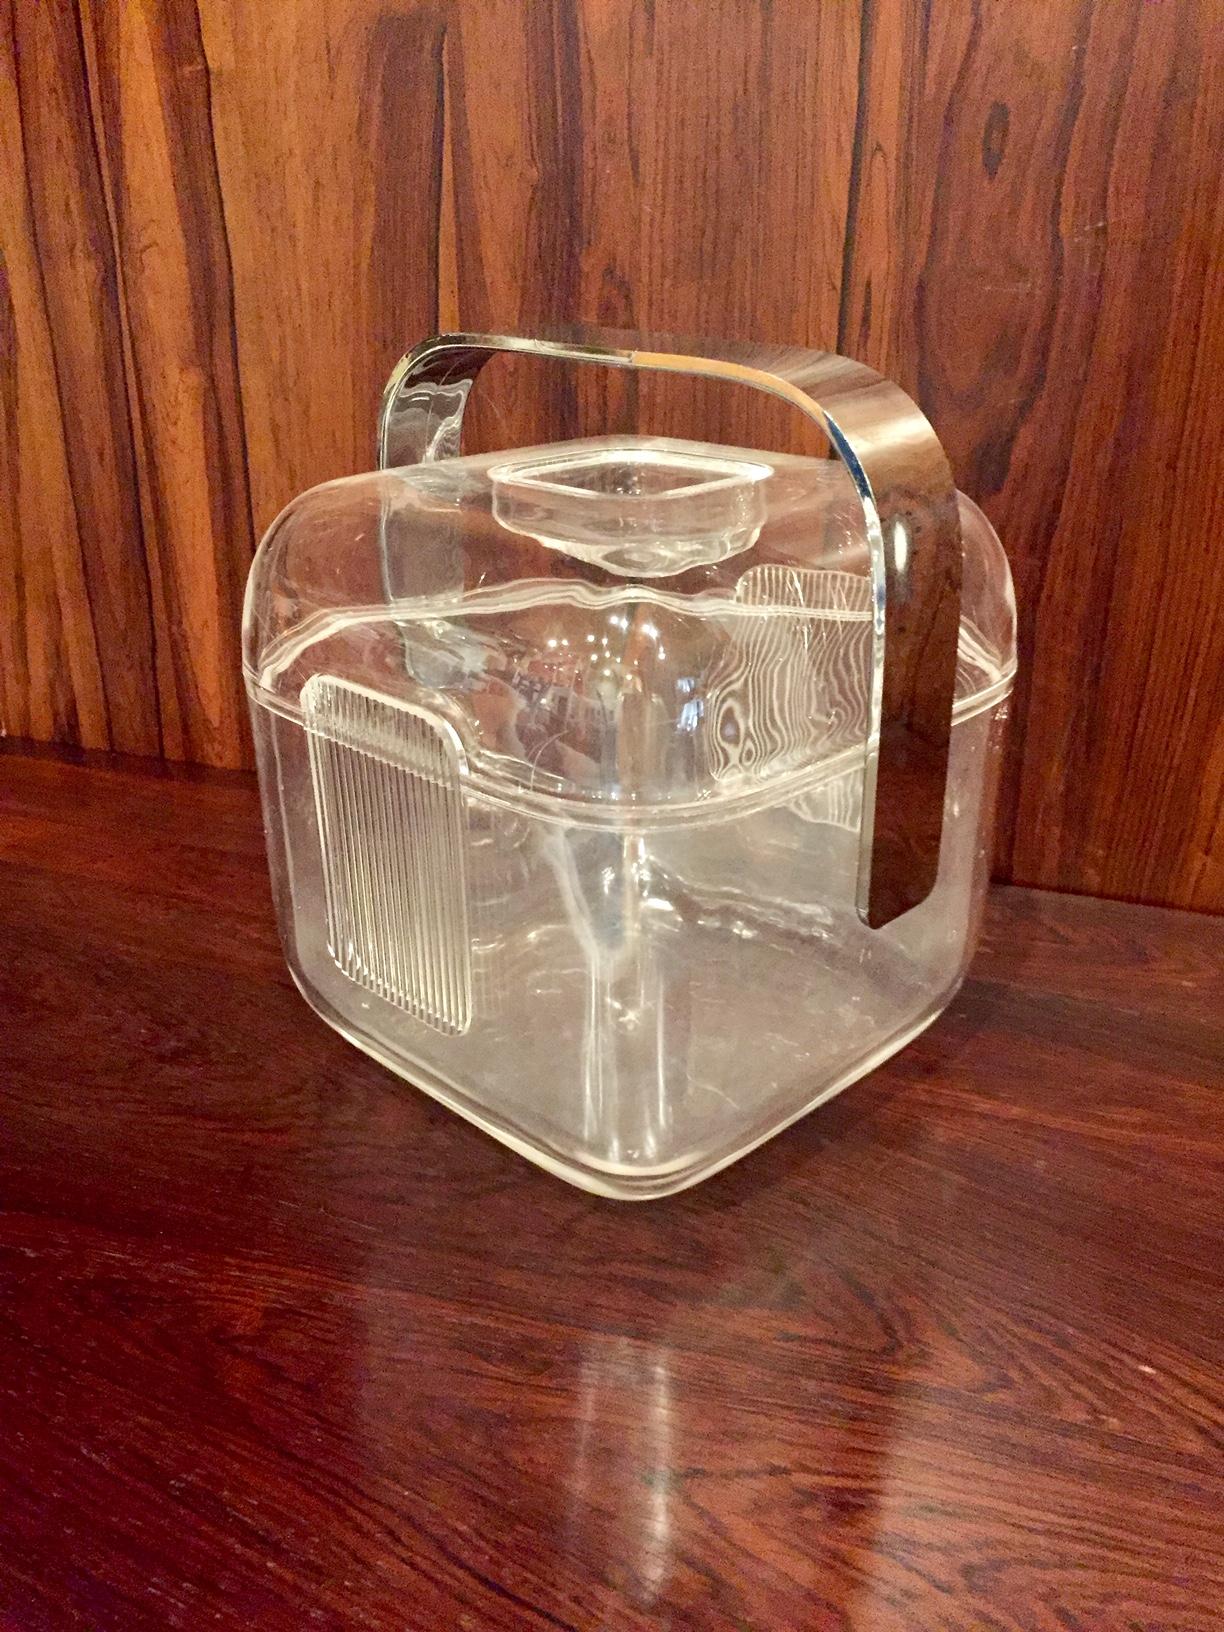 Vintage stylish Italian design. The design of this elegant ice bucket is timeless. Incredibly chic. A glamorous addition to your bar or as a stylish vessel for other uses.